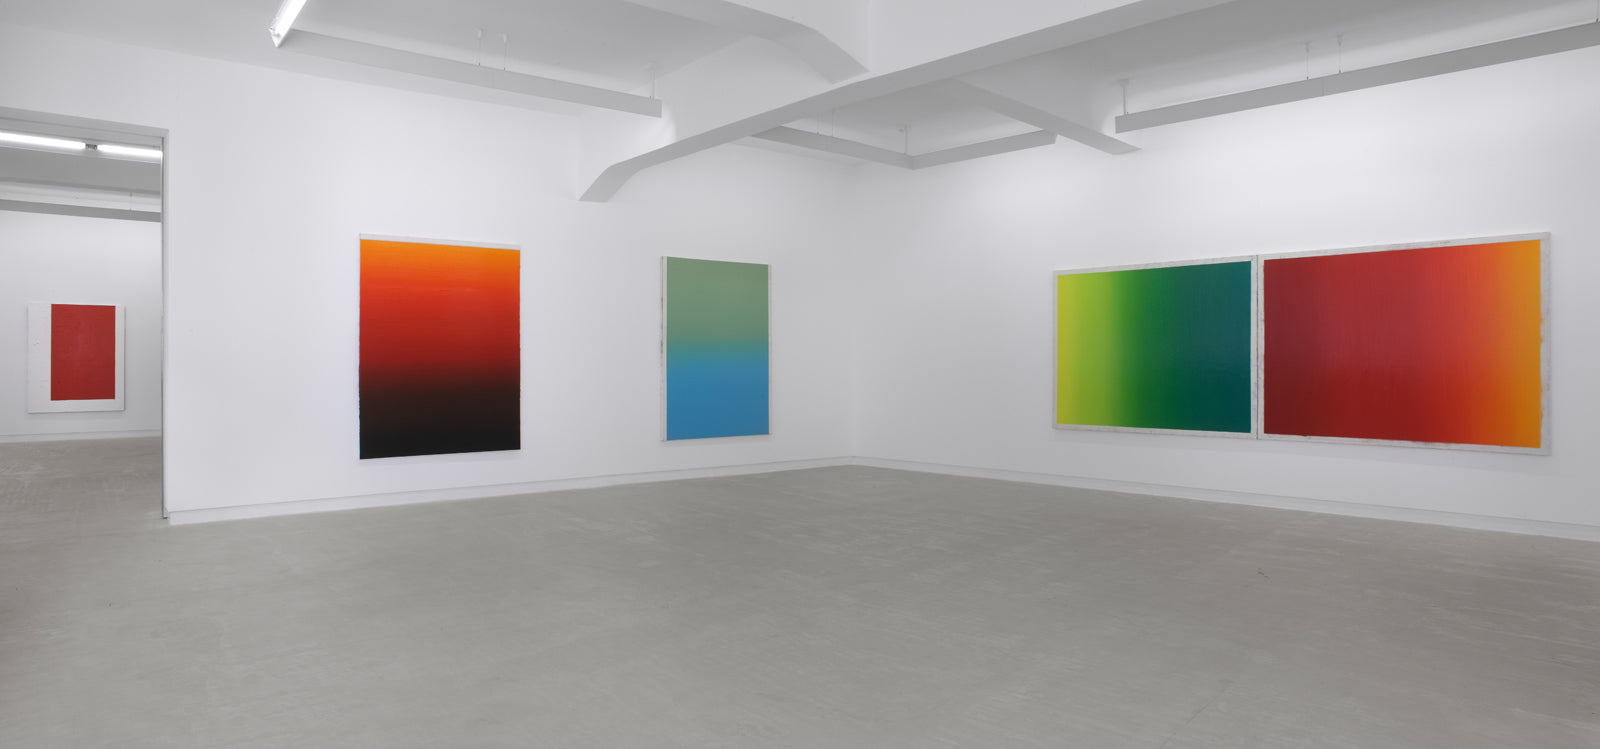 Shaan Syed, Please Play By The Rules, Installation view, 2009, Galerie Michael Janssen, Berlin